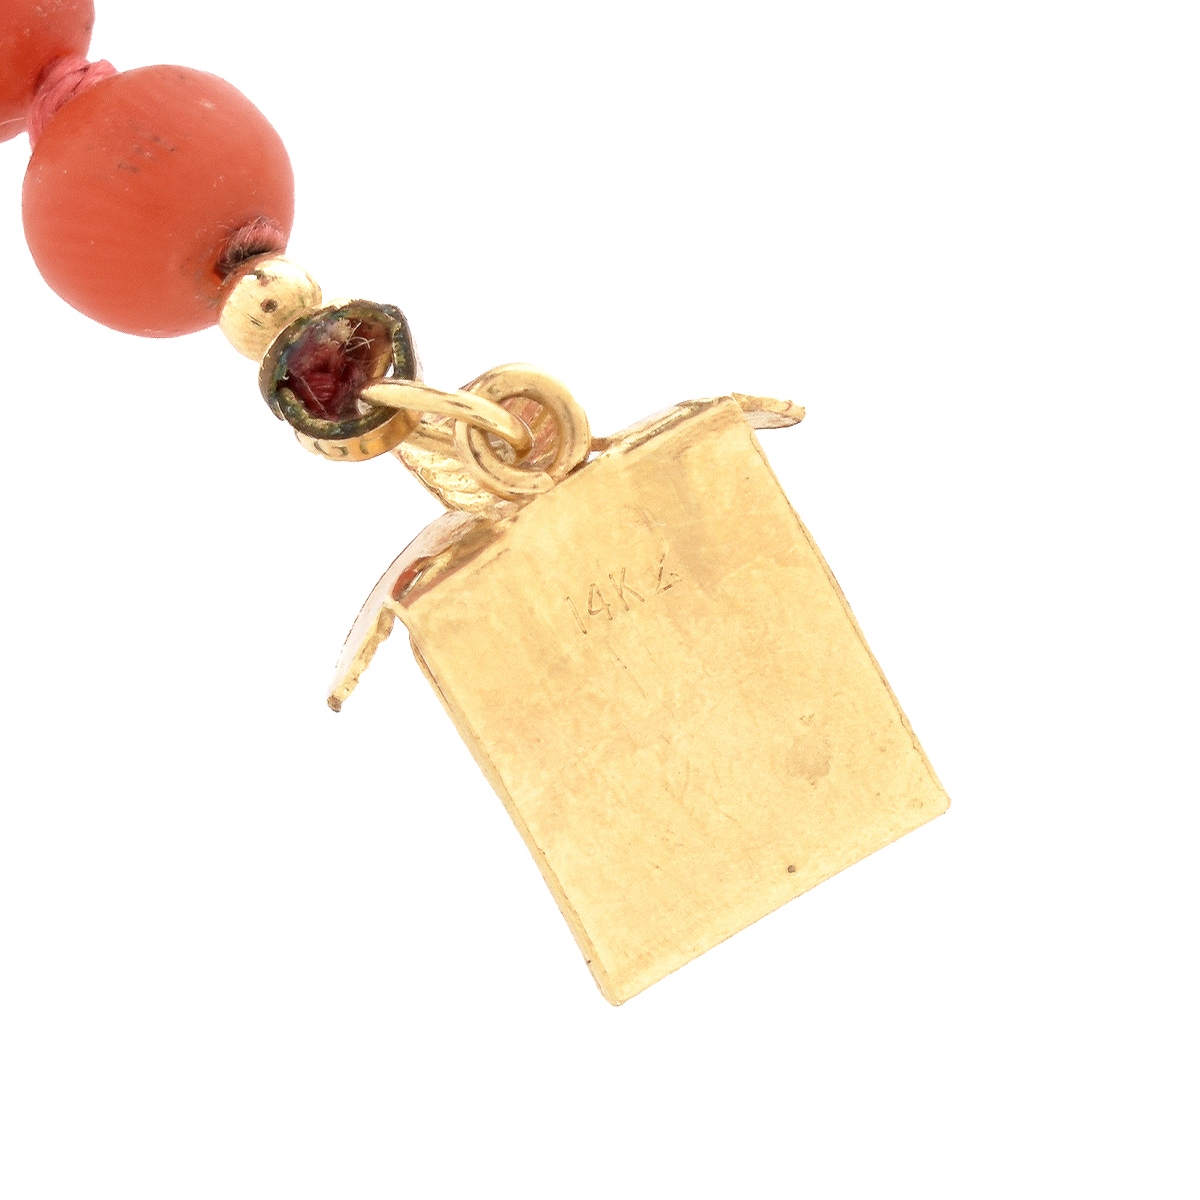 Vintage Coral Bead and 14K Necklace